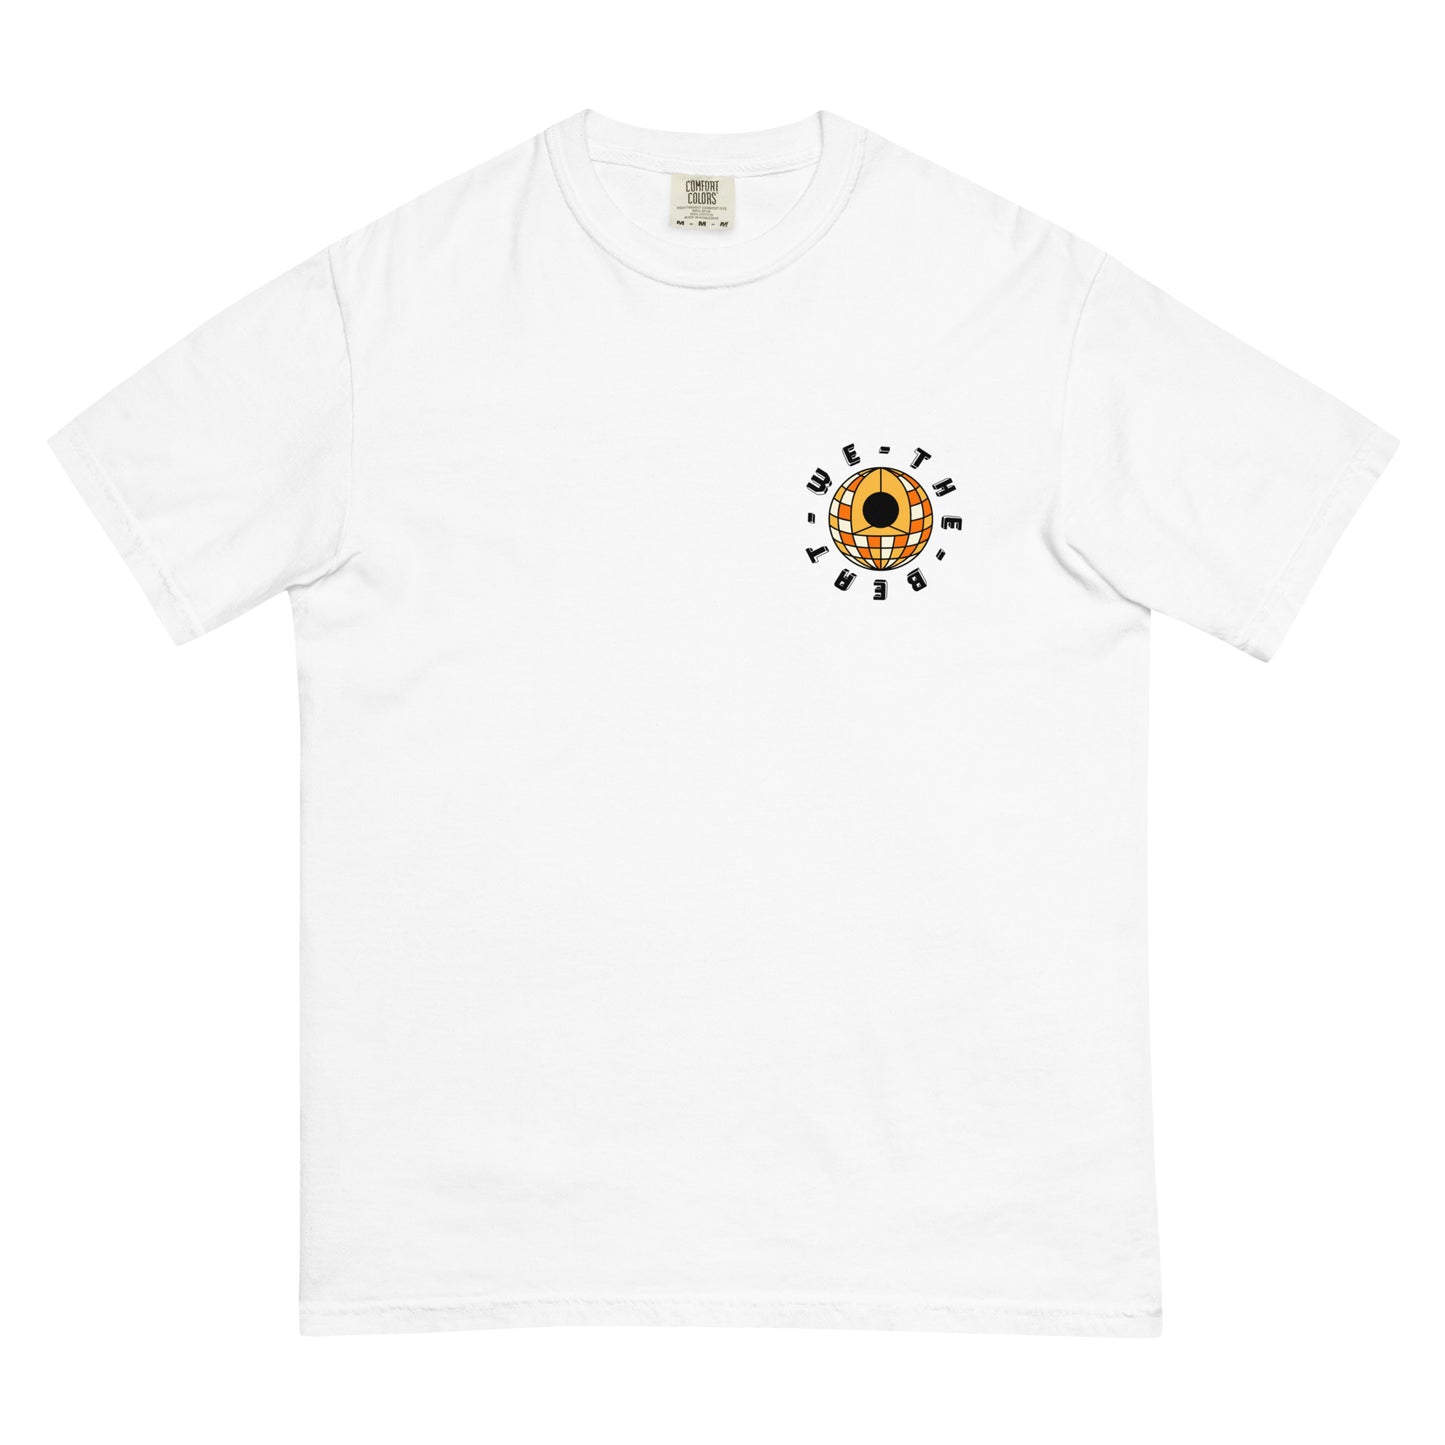 No Thoughts Just Vibes T-Shirt